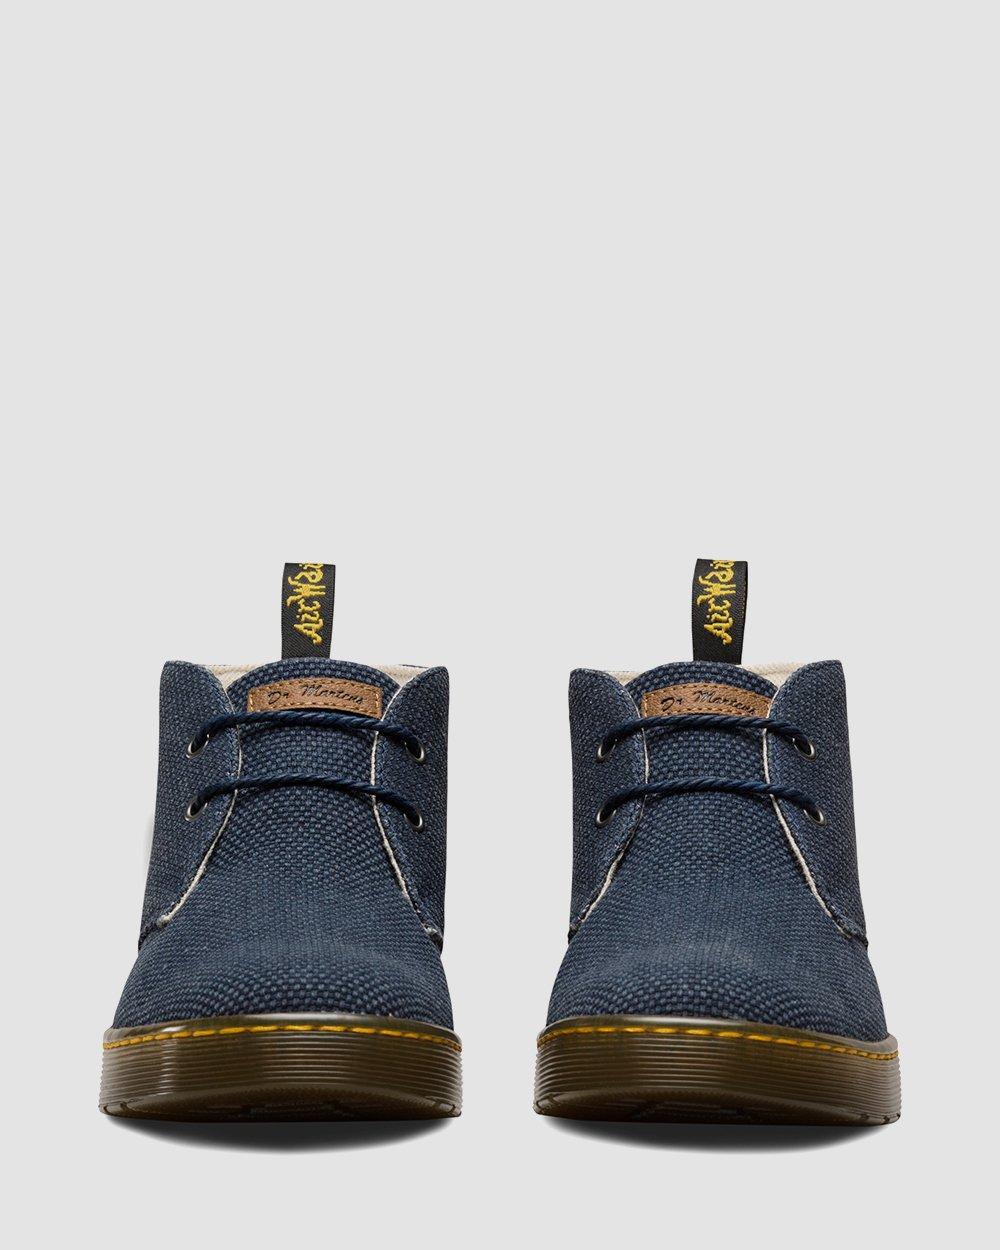 MAYPORT MILITARY CANVAS in Navy